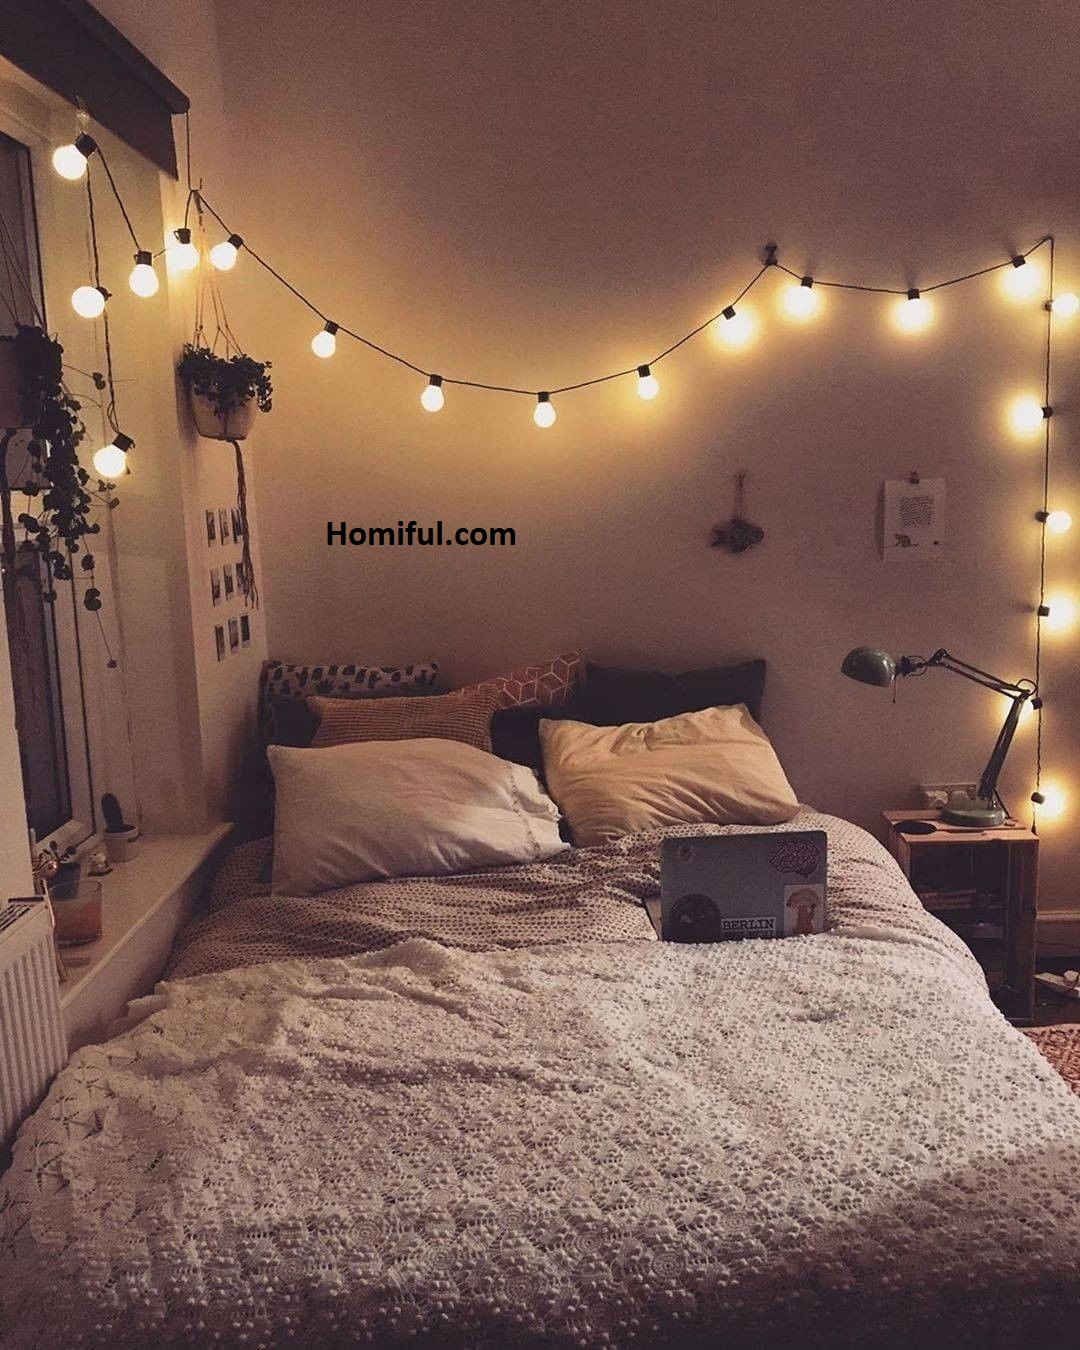 18 Best Bedroom Ideas Look Expensive In Every Style ~ Homiful.com ...